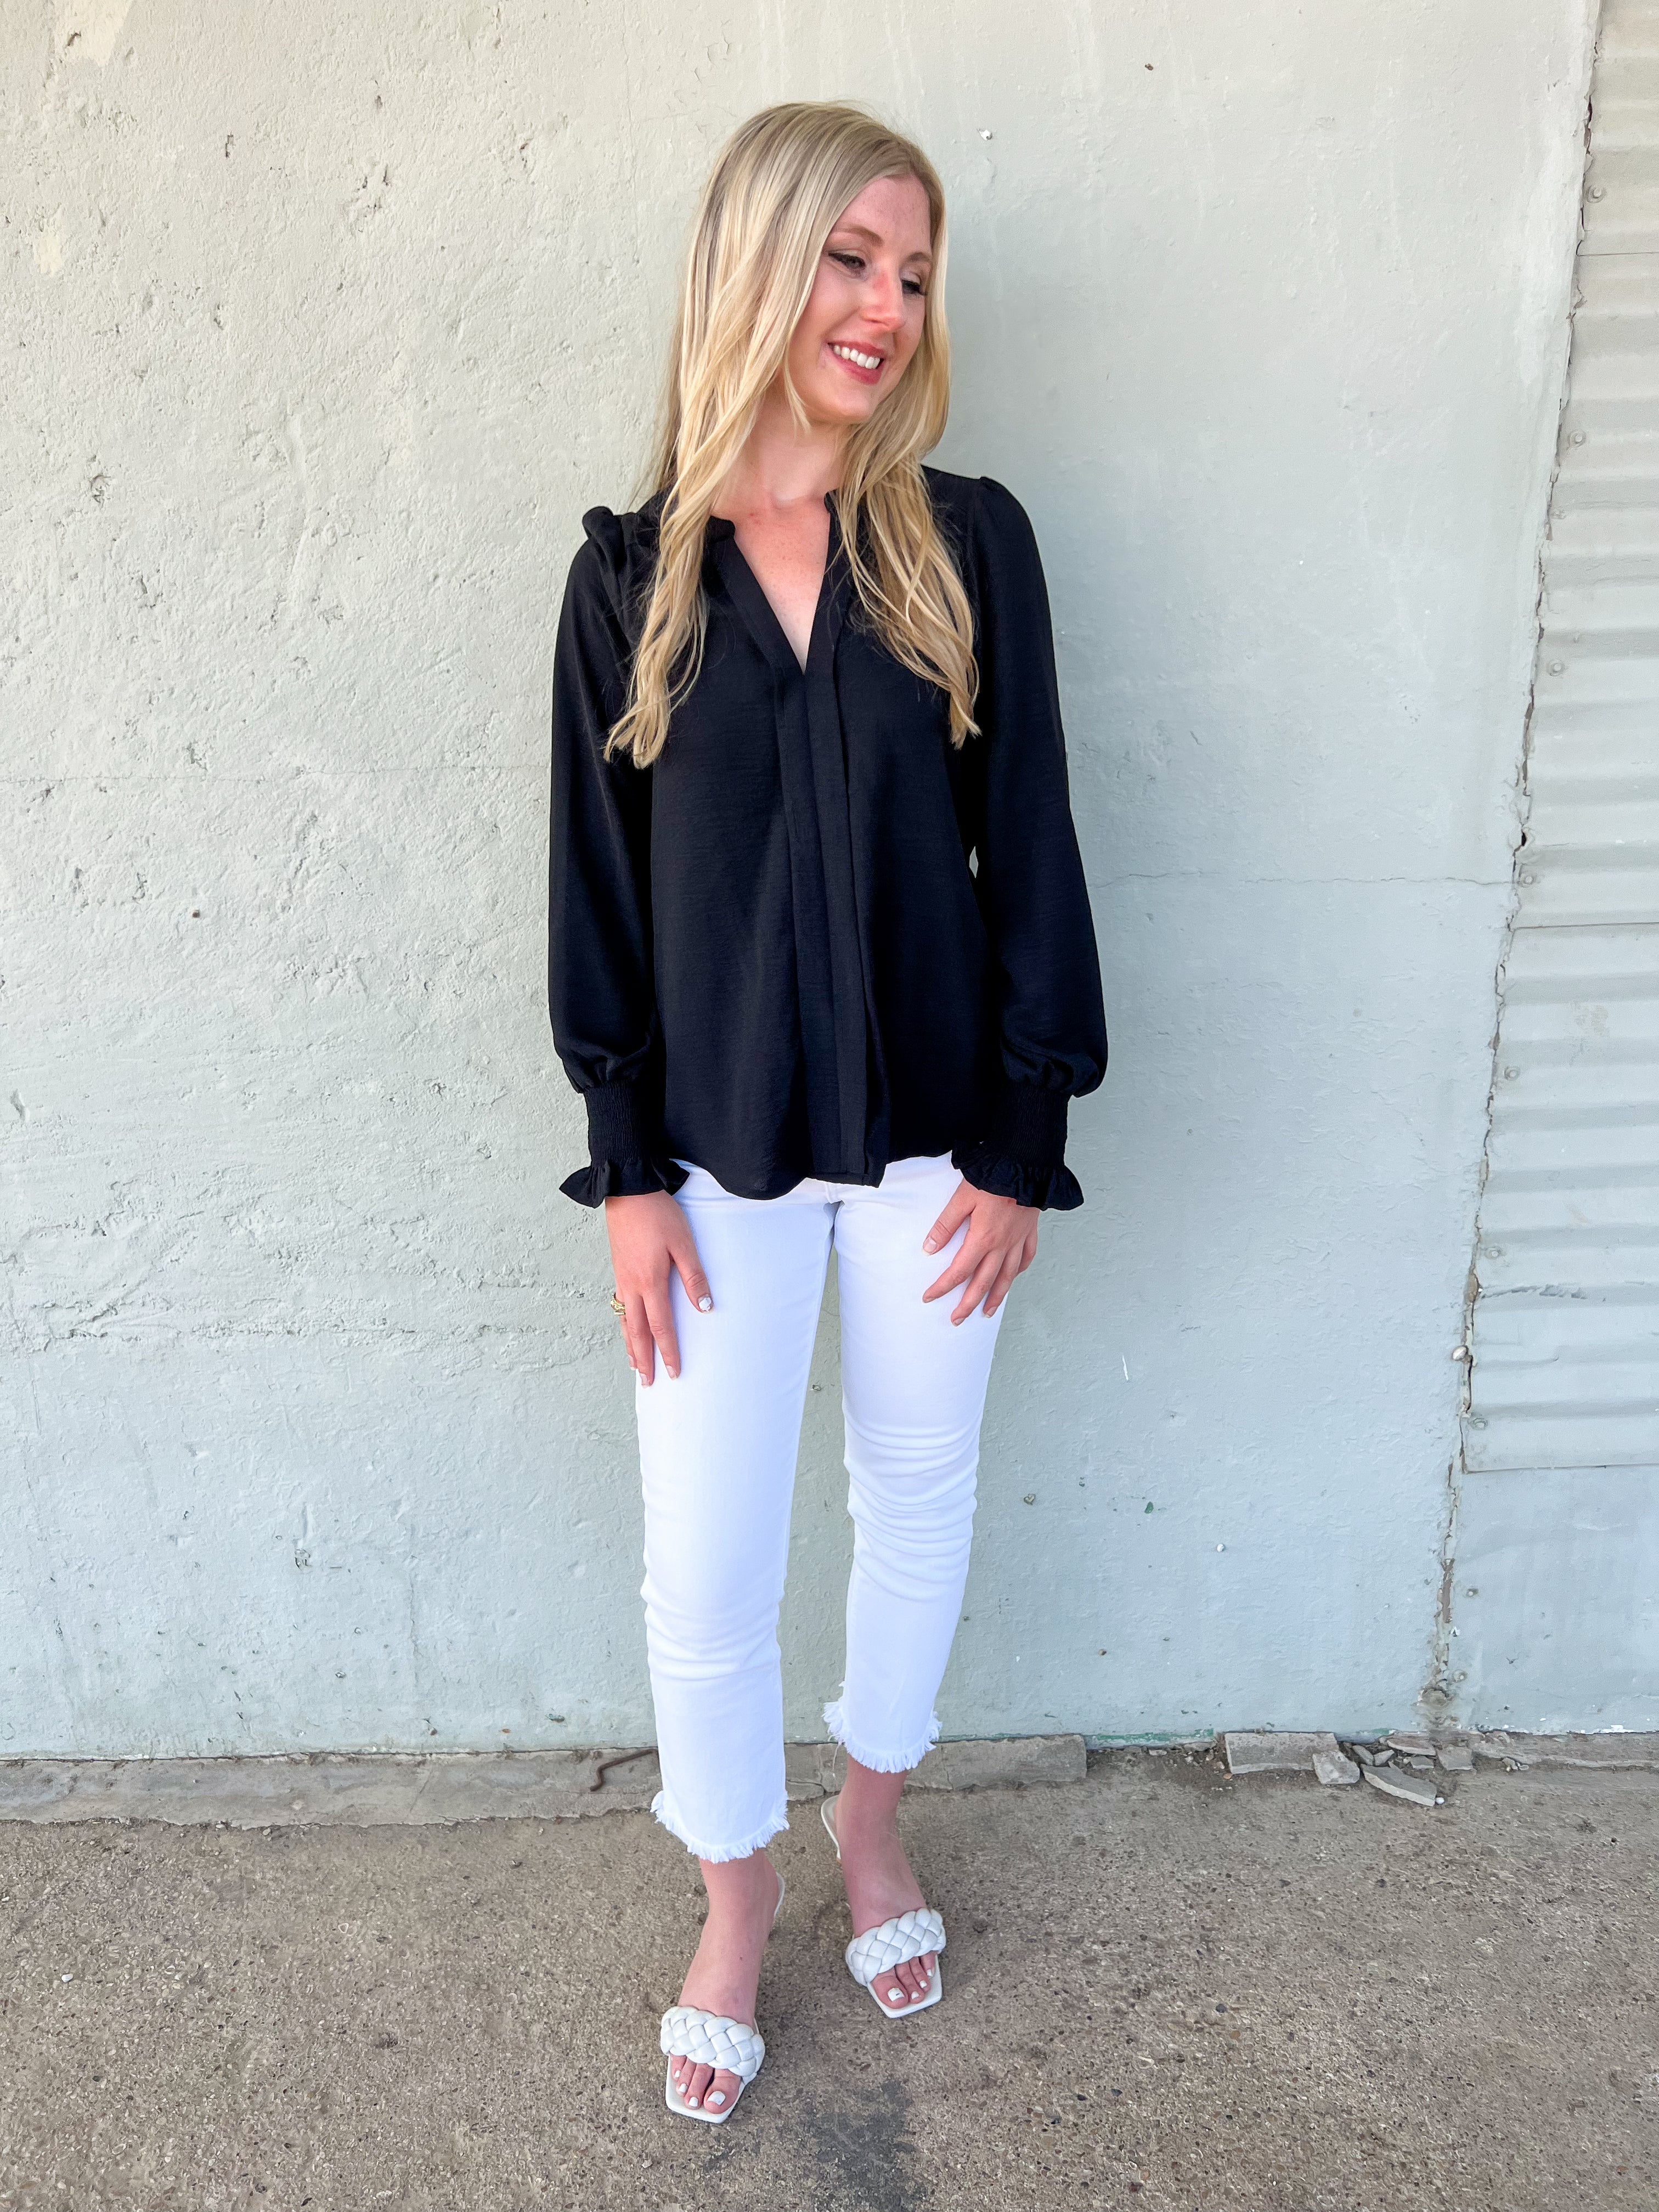 Long Sleeve Blouse in Black - JD Ranch Boutique